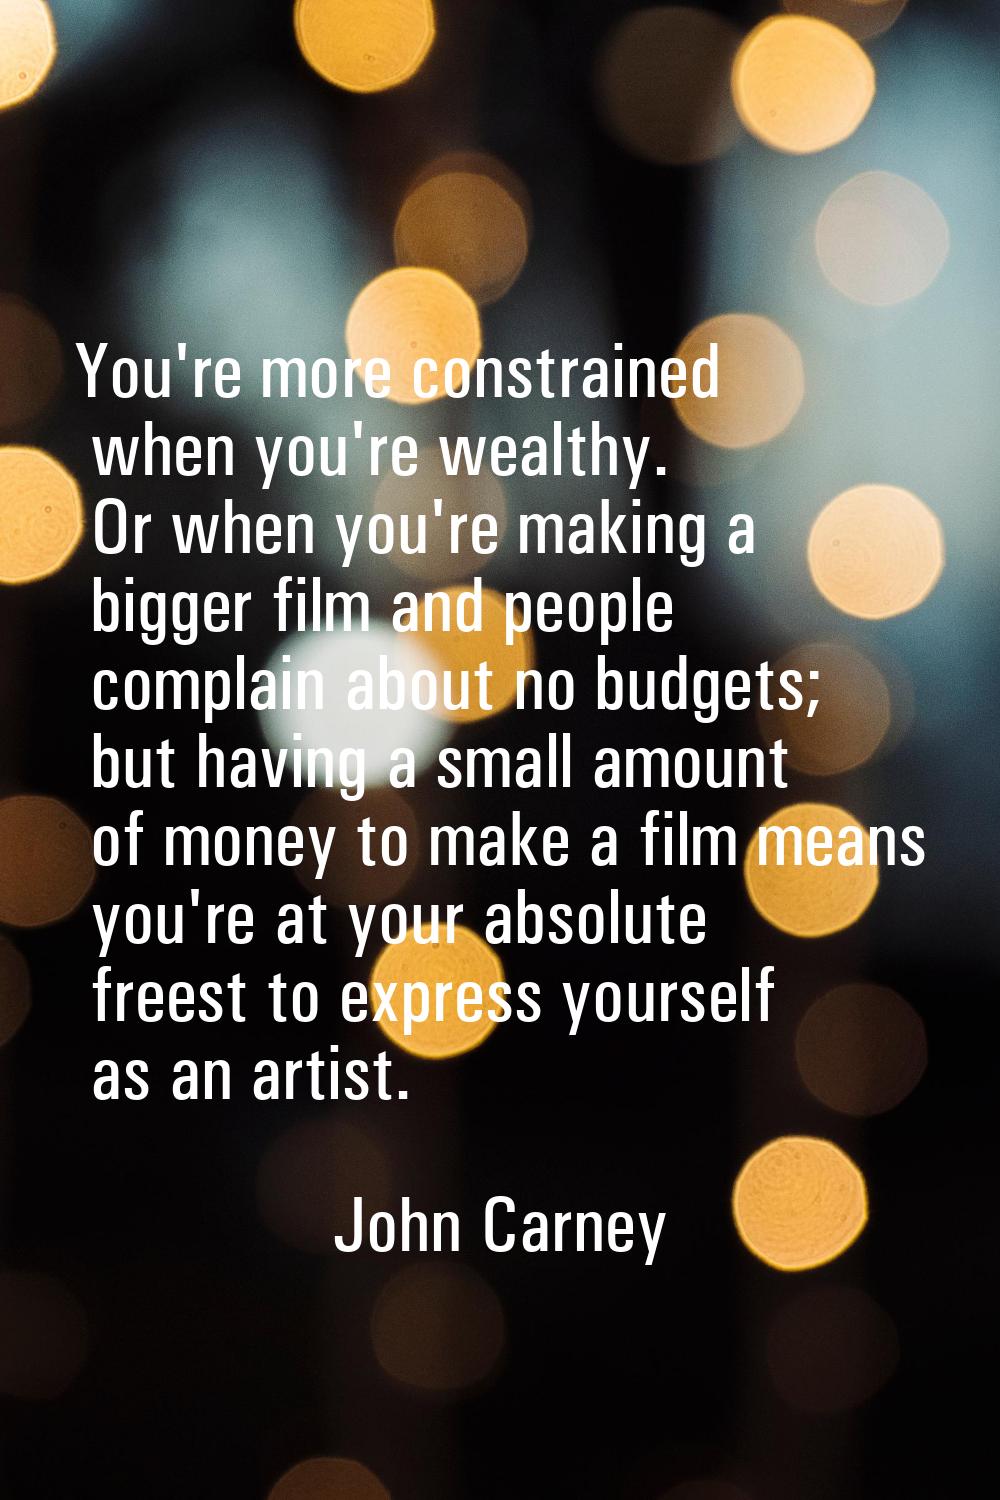 You're more constrained when you're wealthy. Or when you're making a bigger film and people complai